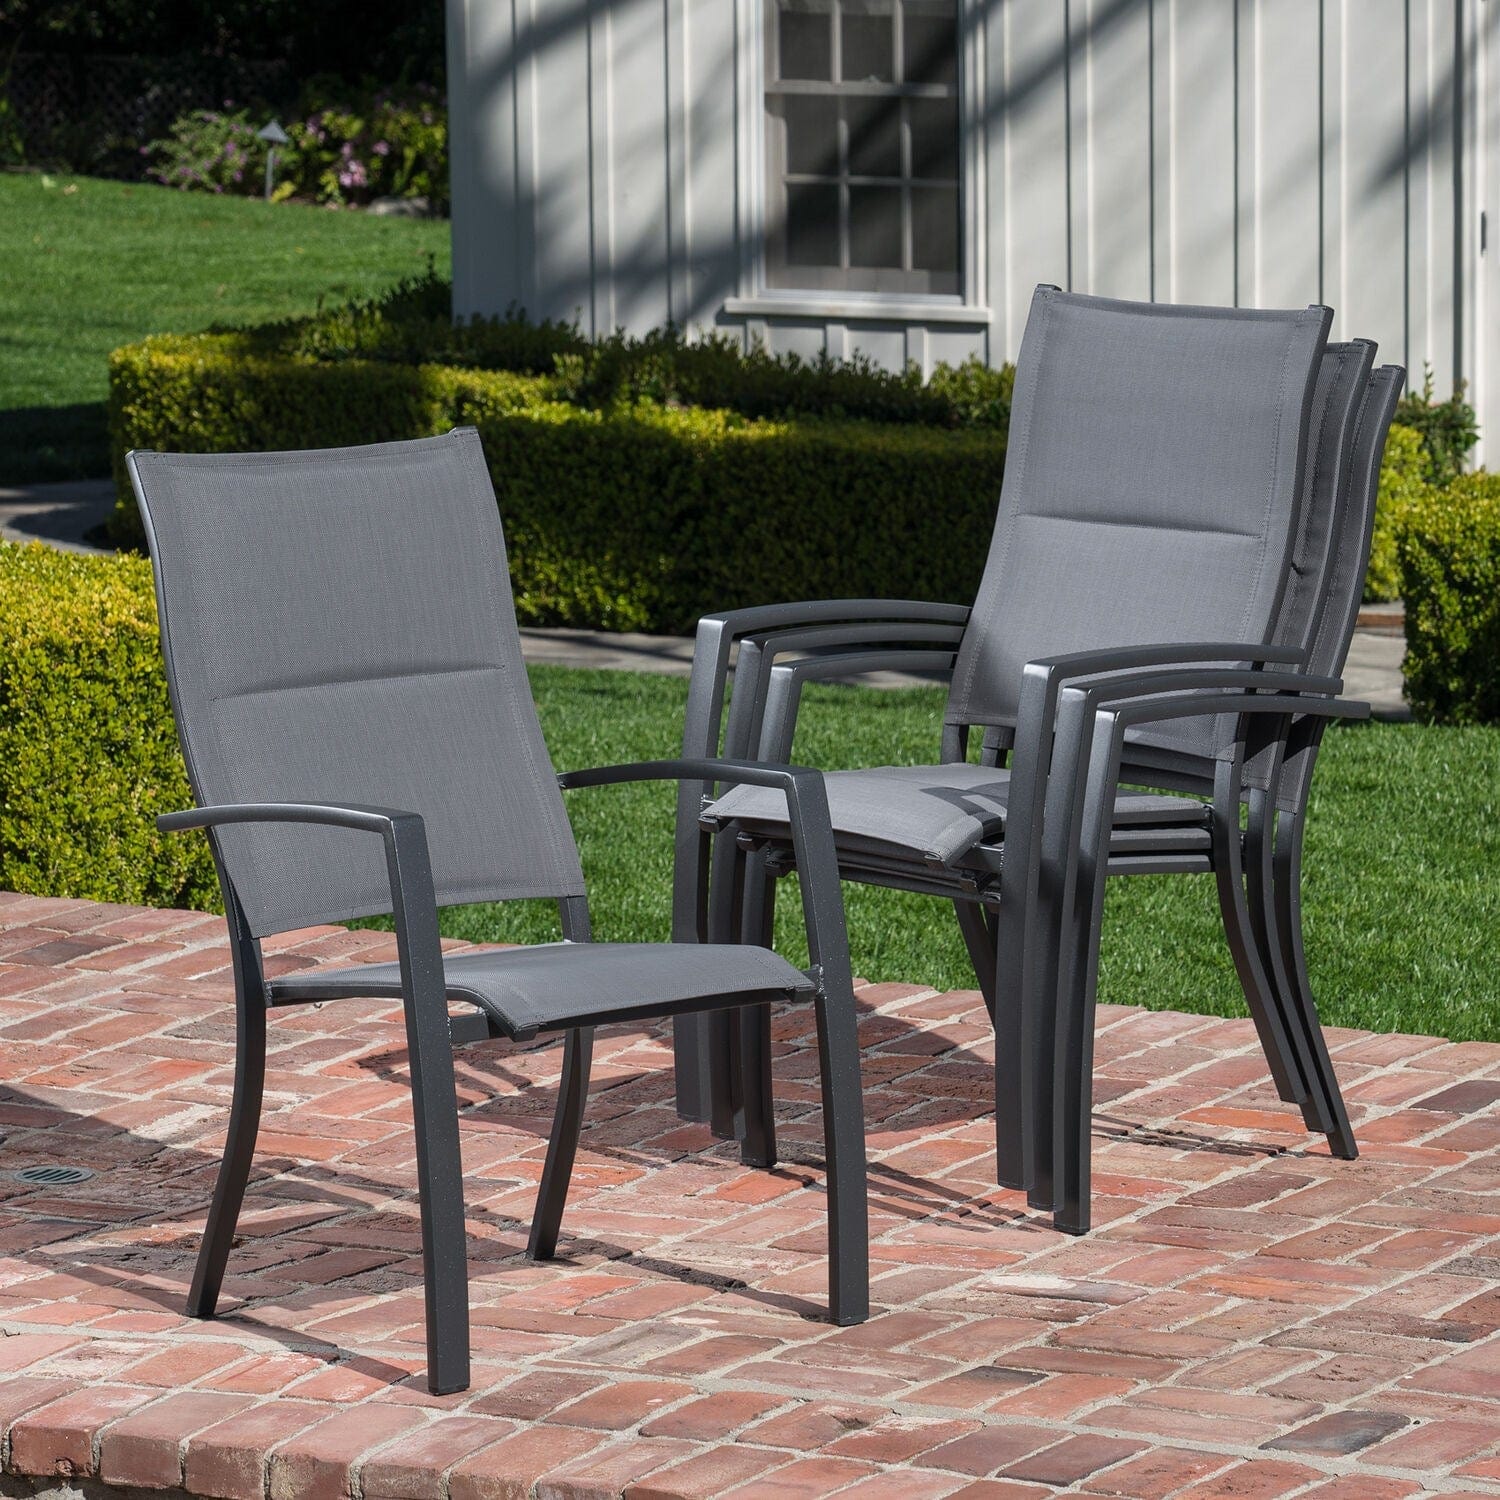 Hanover Fire Table Dining Set Hanover - Naples 5pc Fire Pit: 4 High Back Padded Chairs and Tile Top Fire Pit | 30x30 | NAPLES5PCHBFP-GRY